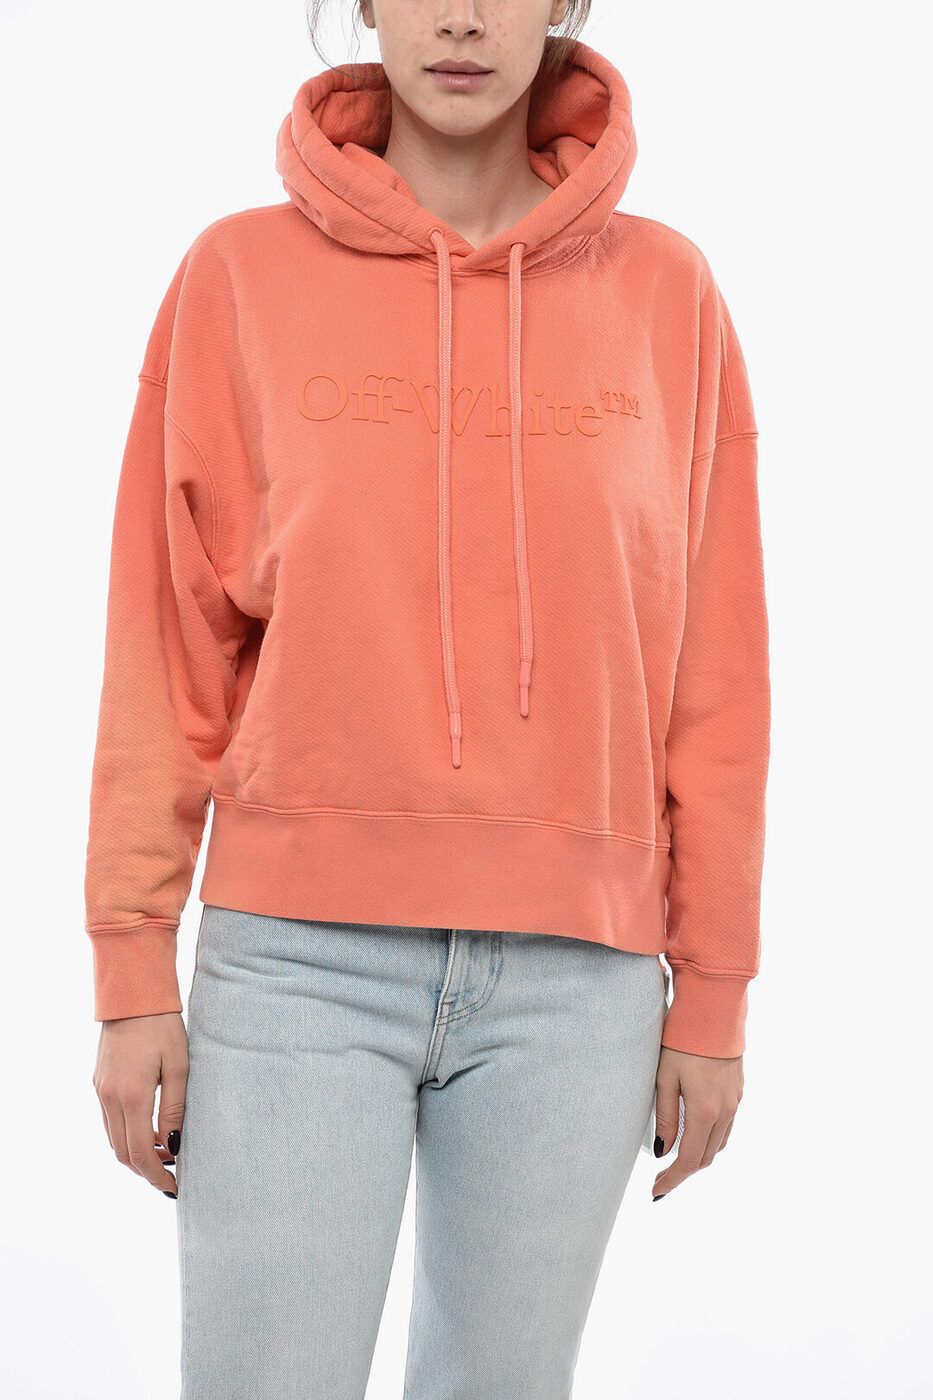 OFF WHITE オフホワイト トレーナー OWBB049S23JER0012626 レディース BRUSHED COTTON LAUNDRY HOODIE 【関税・送料無料】【ラッピング無料】 dk